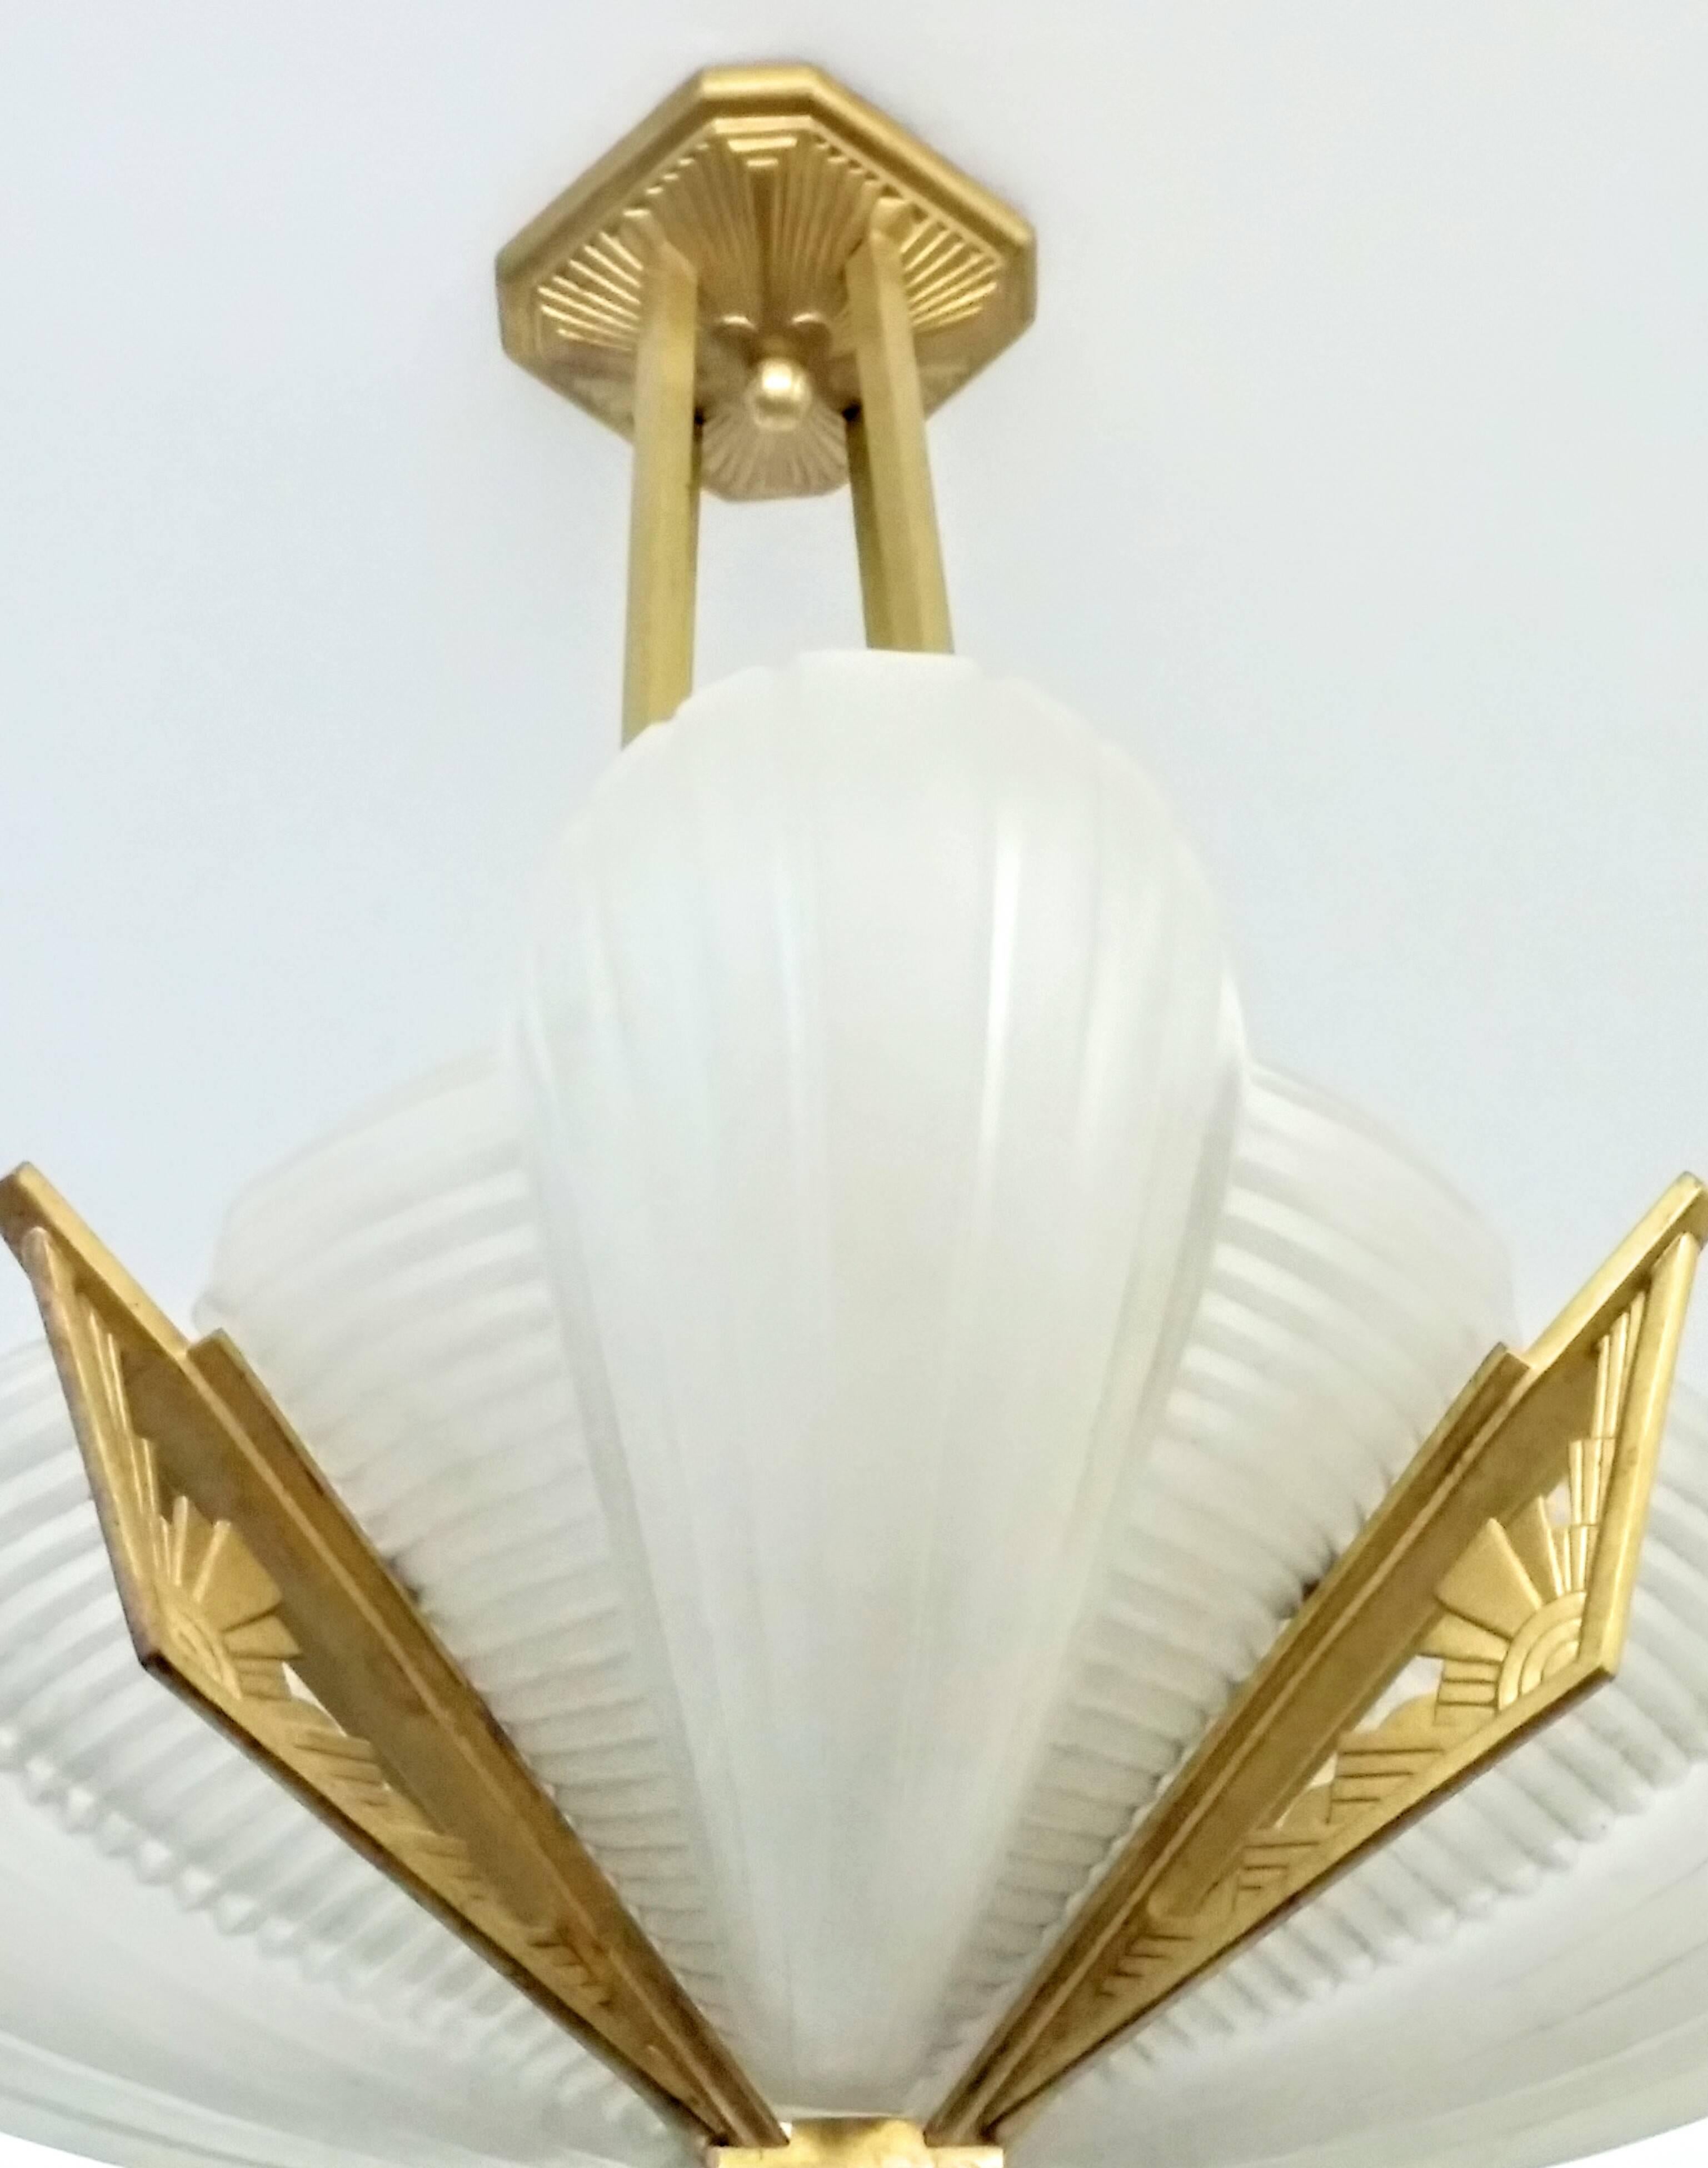 Pressed French Art Deco Pendant Chandelier by Atelier Petitot  (Pair available)